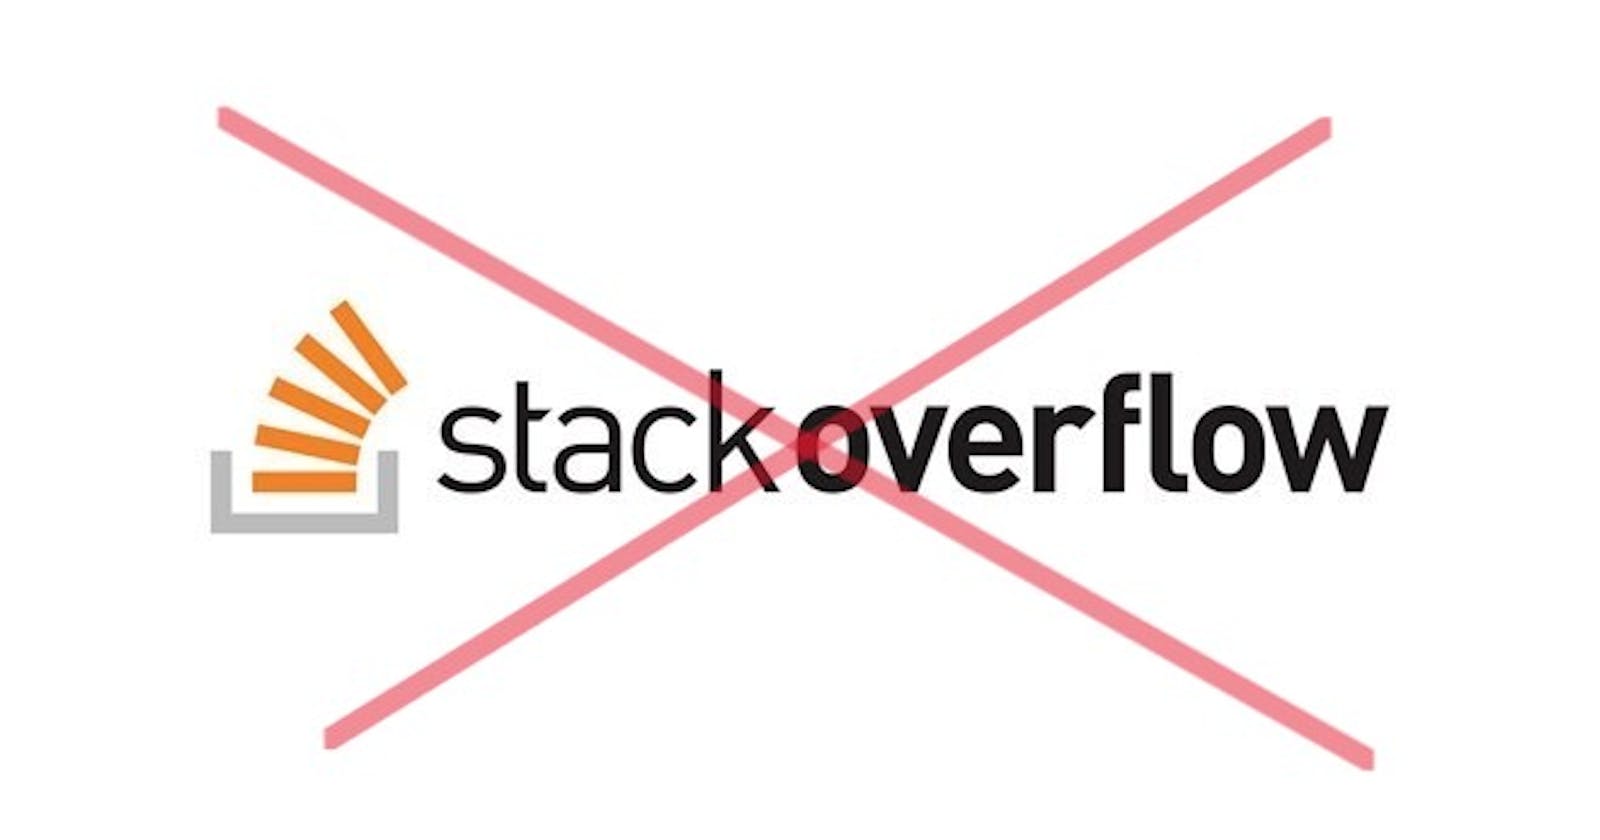 Stack Overflow is USELESS!